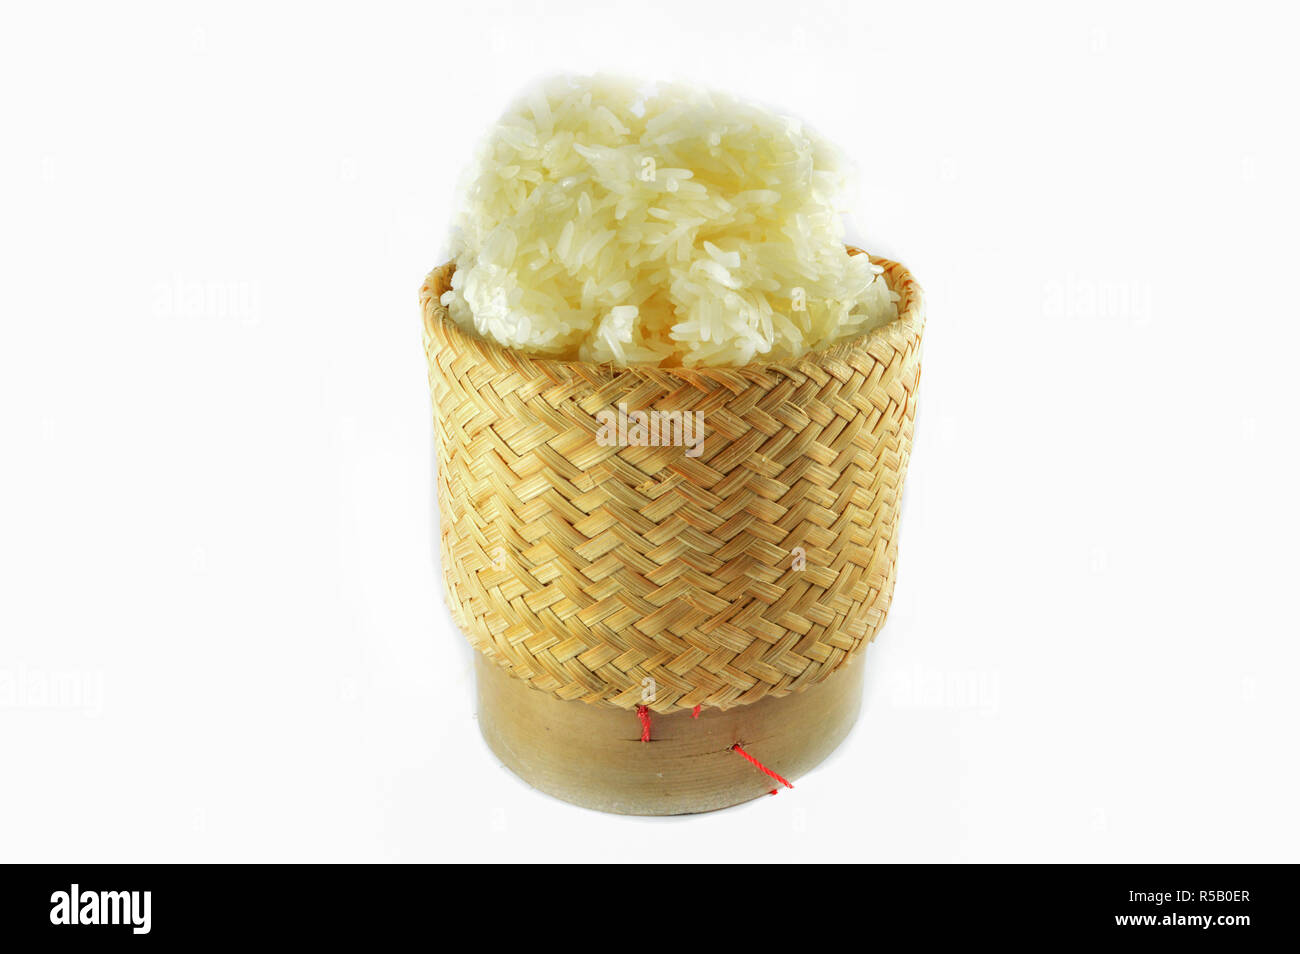 https://c8.alamy.com/comp/R5B0ER/thai-sticky-rice-cooked-in-rice-box-with-bamboo-wooden-rice-streamed-isolated-on-white-background-R5B0ER.jpg